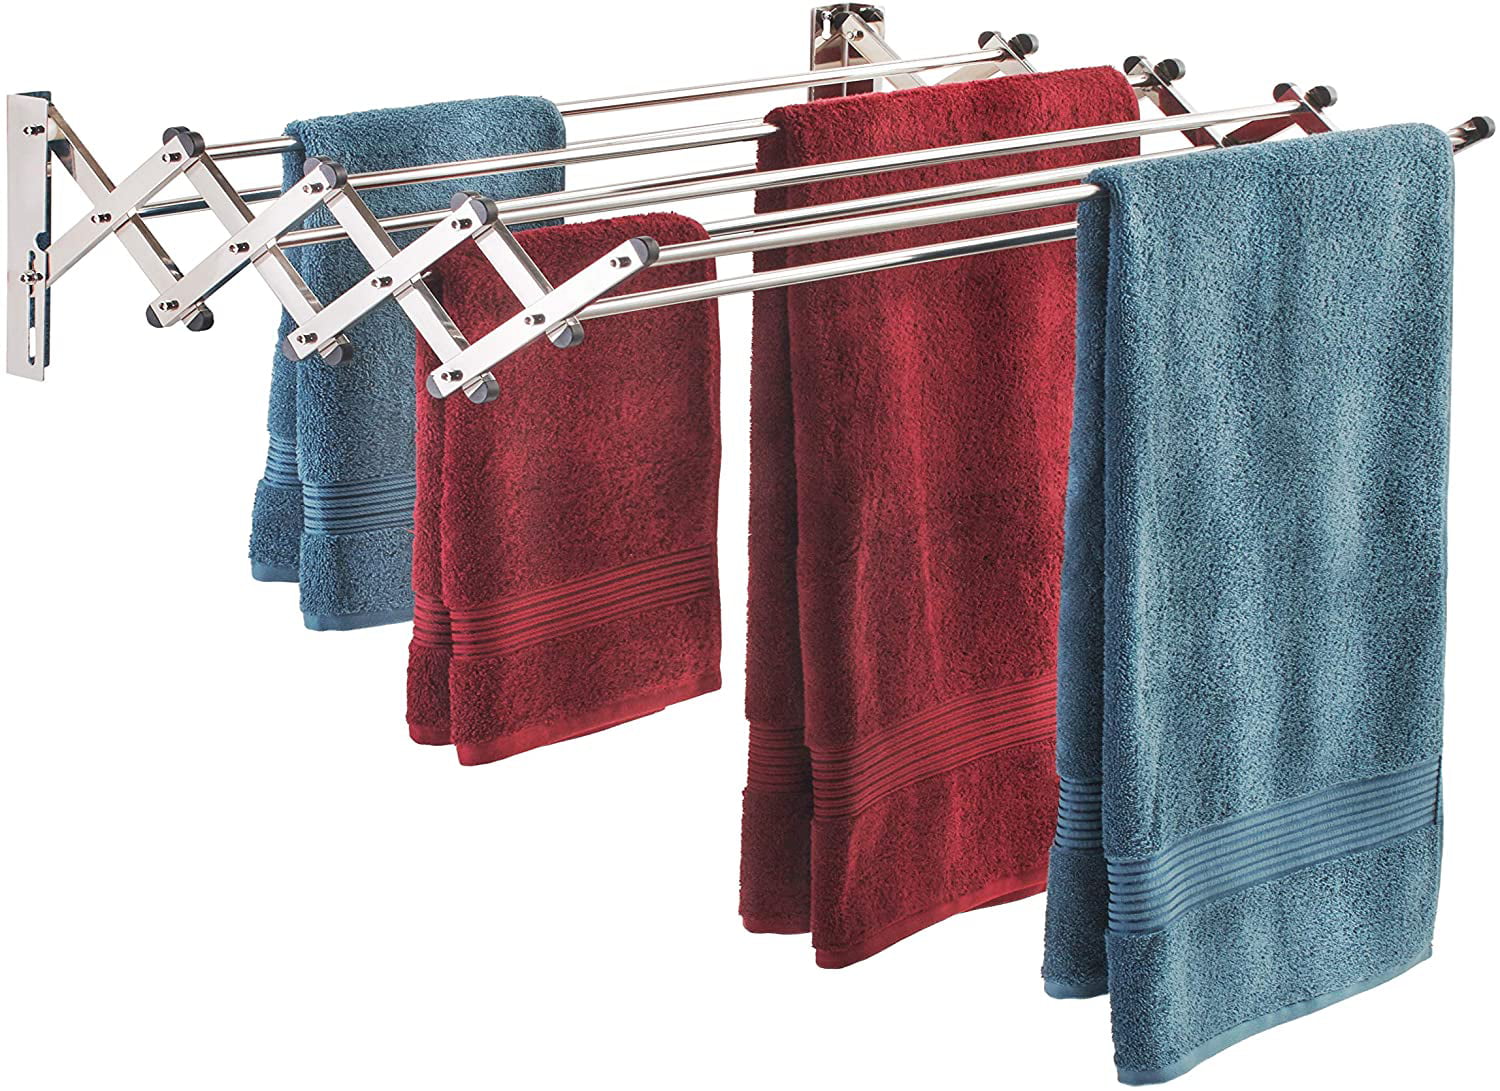 Towel Rack Wall Mounted Stainless Steel Expandable Clothes Drying Laundry Hanger 